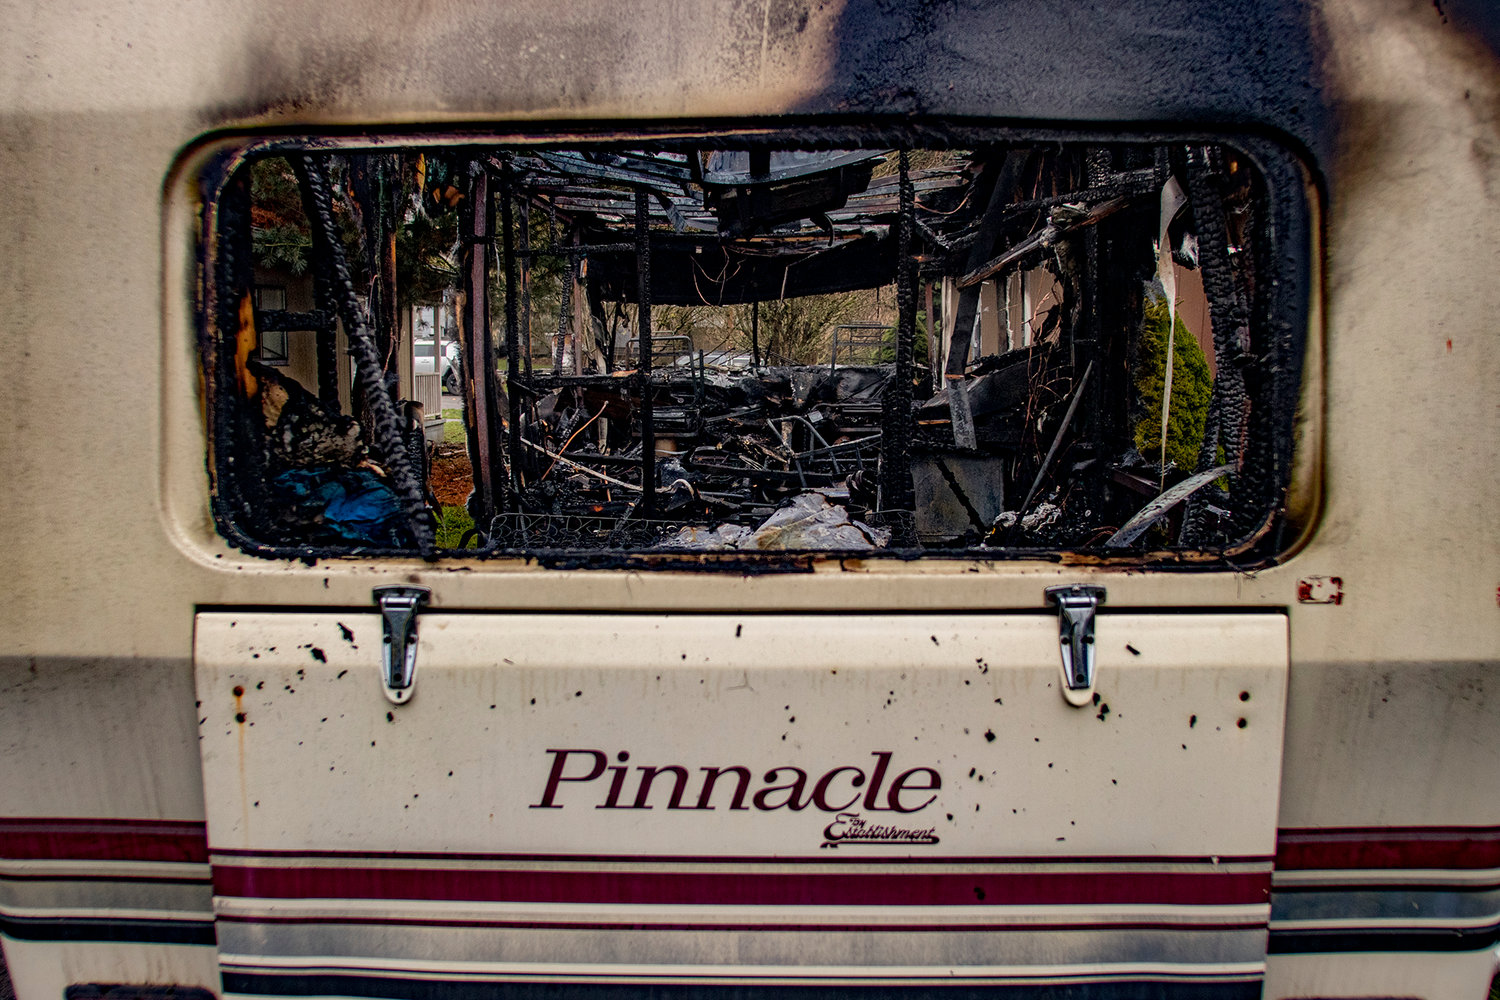 This is the scene after a motorhome caught fire Tuesday night on South Gold Street in Centralia.